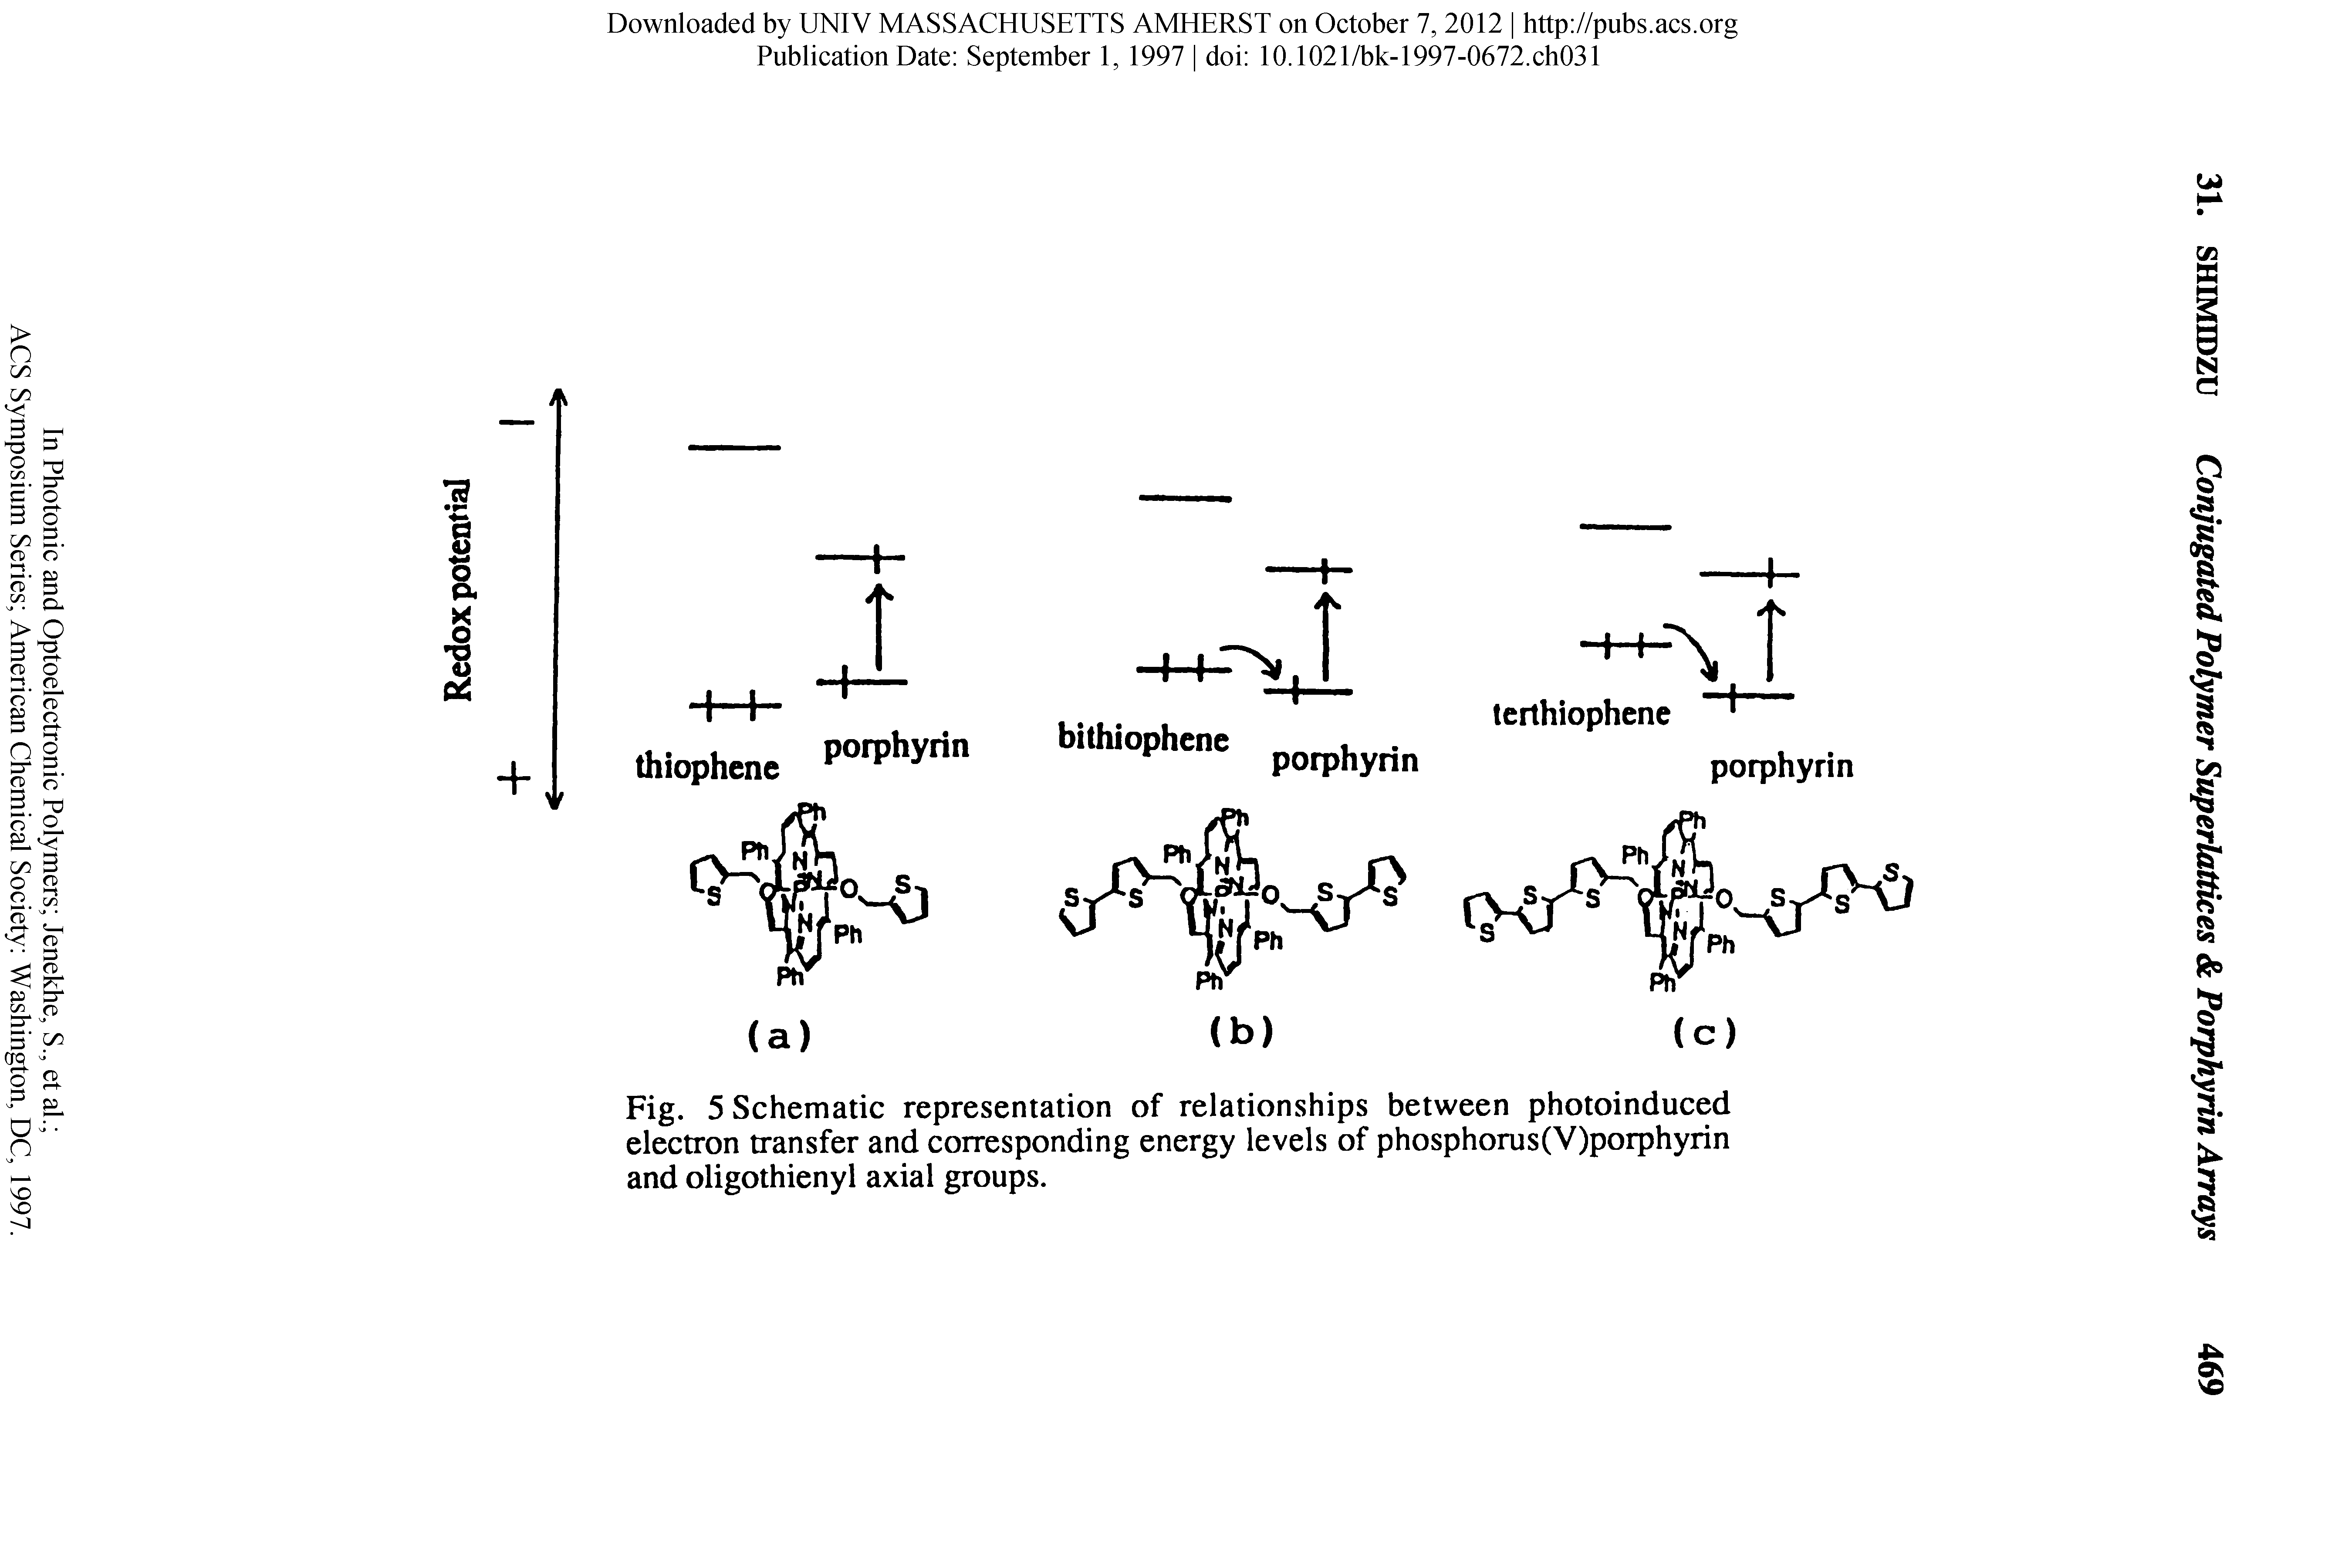 Fig. 5 Schematic representation of relationships between photoinduced electron transfer and corresponding energy levels of phosphorus(V)porphyrin and oligothienyl axial groups.